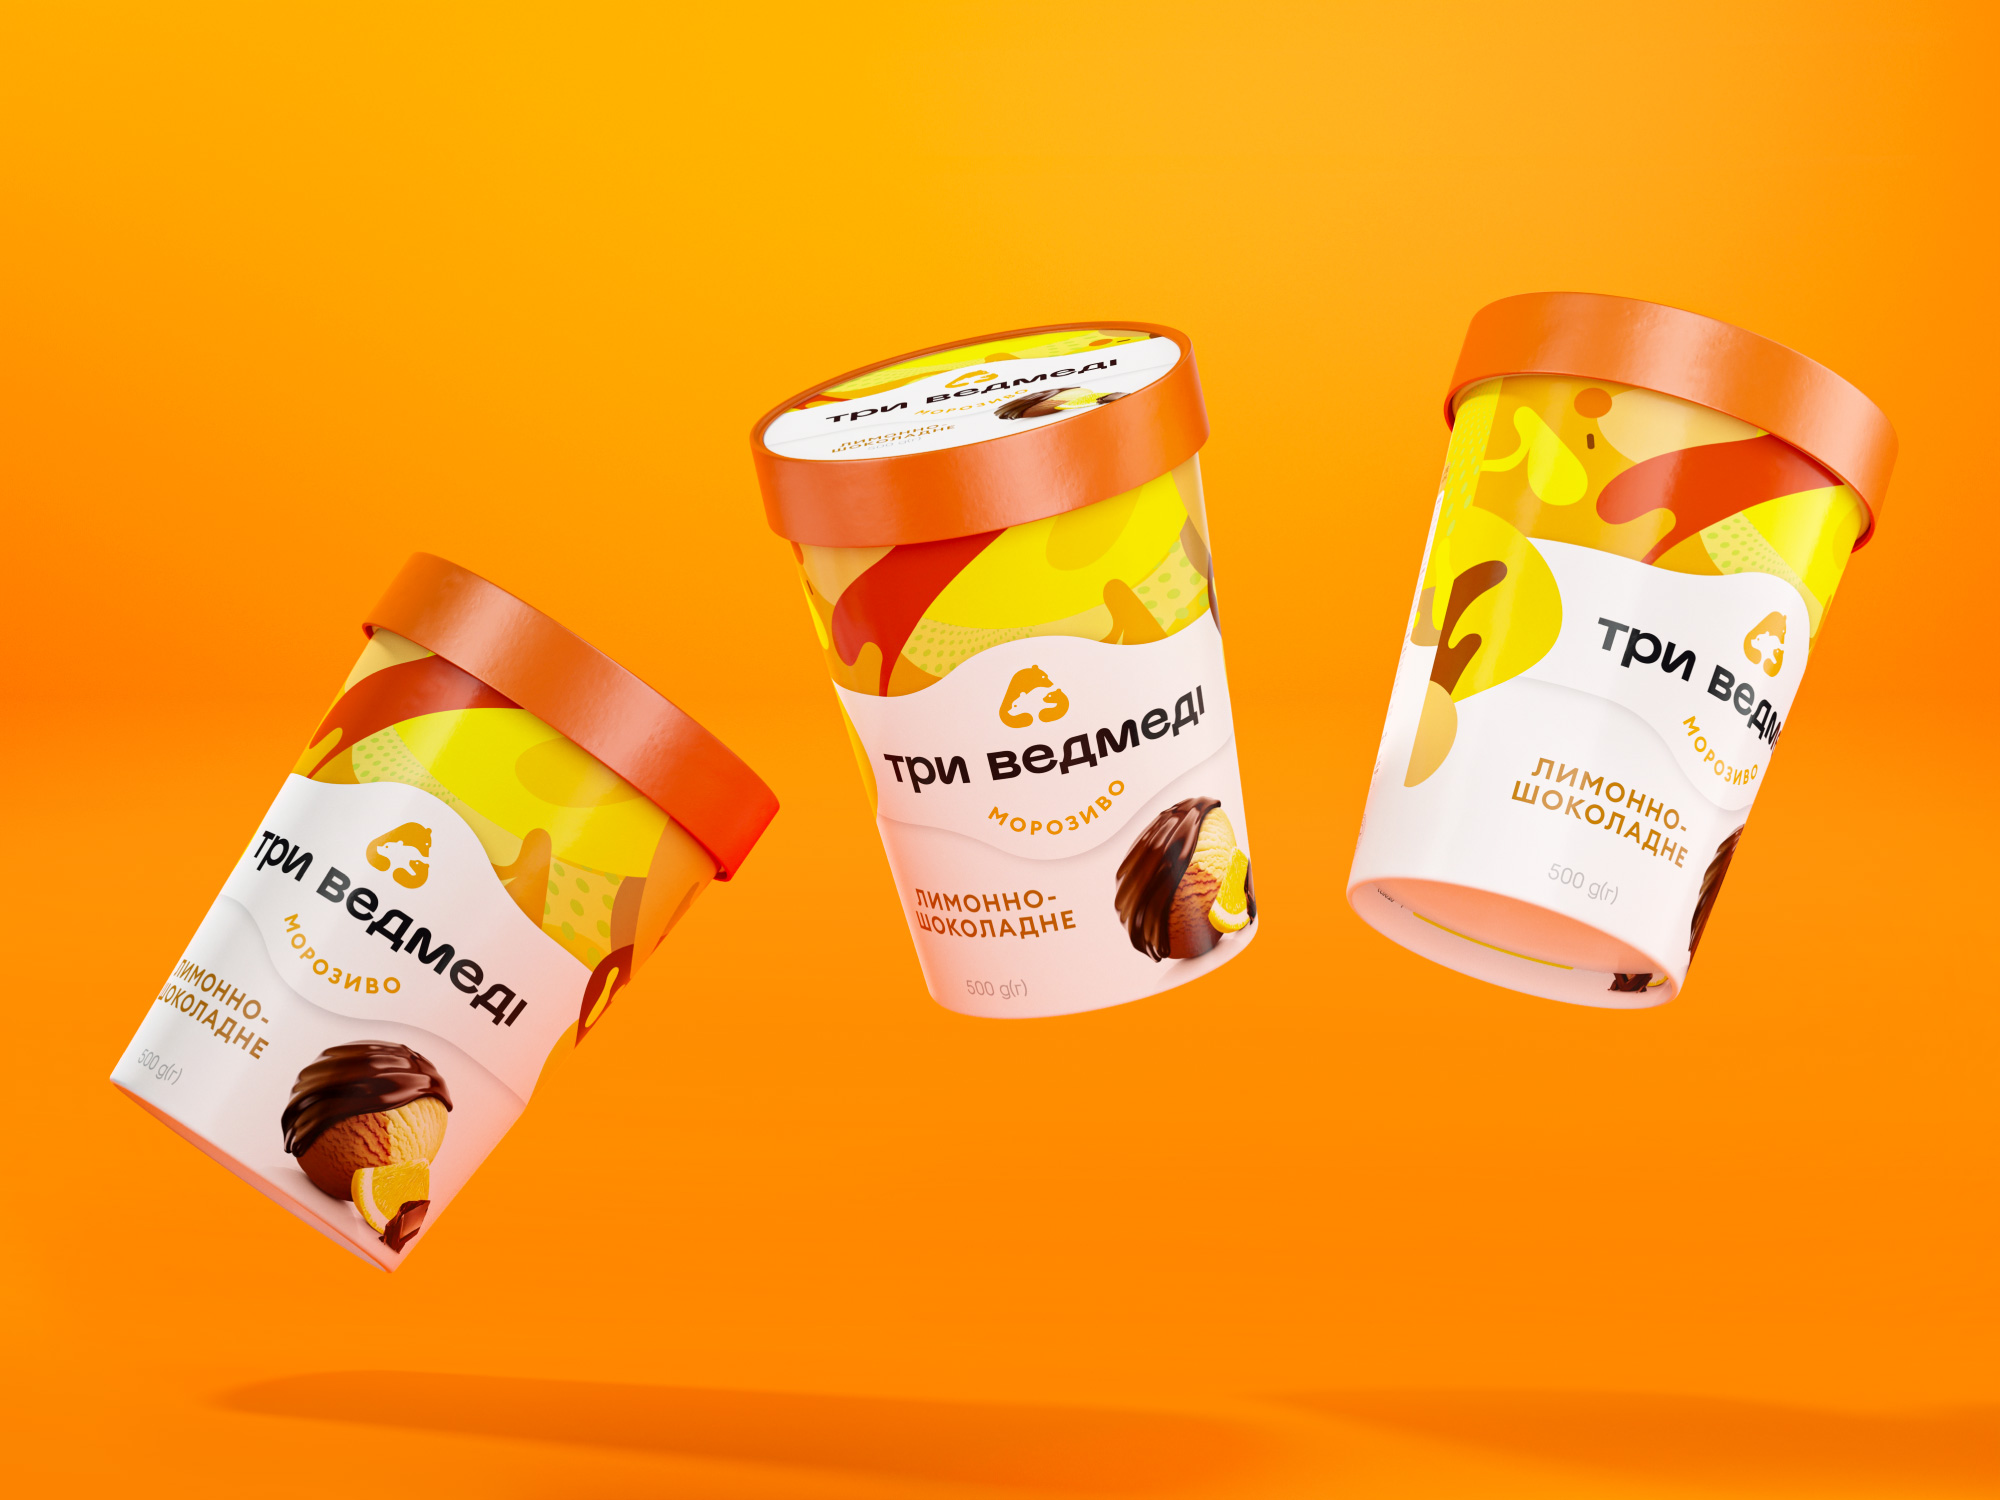 Three Bears Ice Cream Redesign of Packaging by Reynolds and Reyner